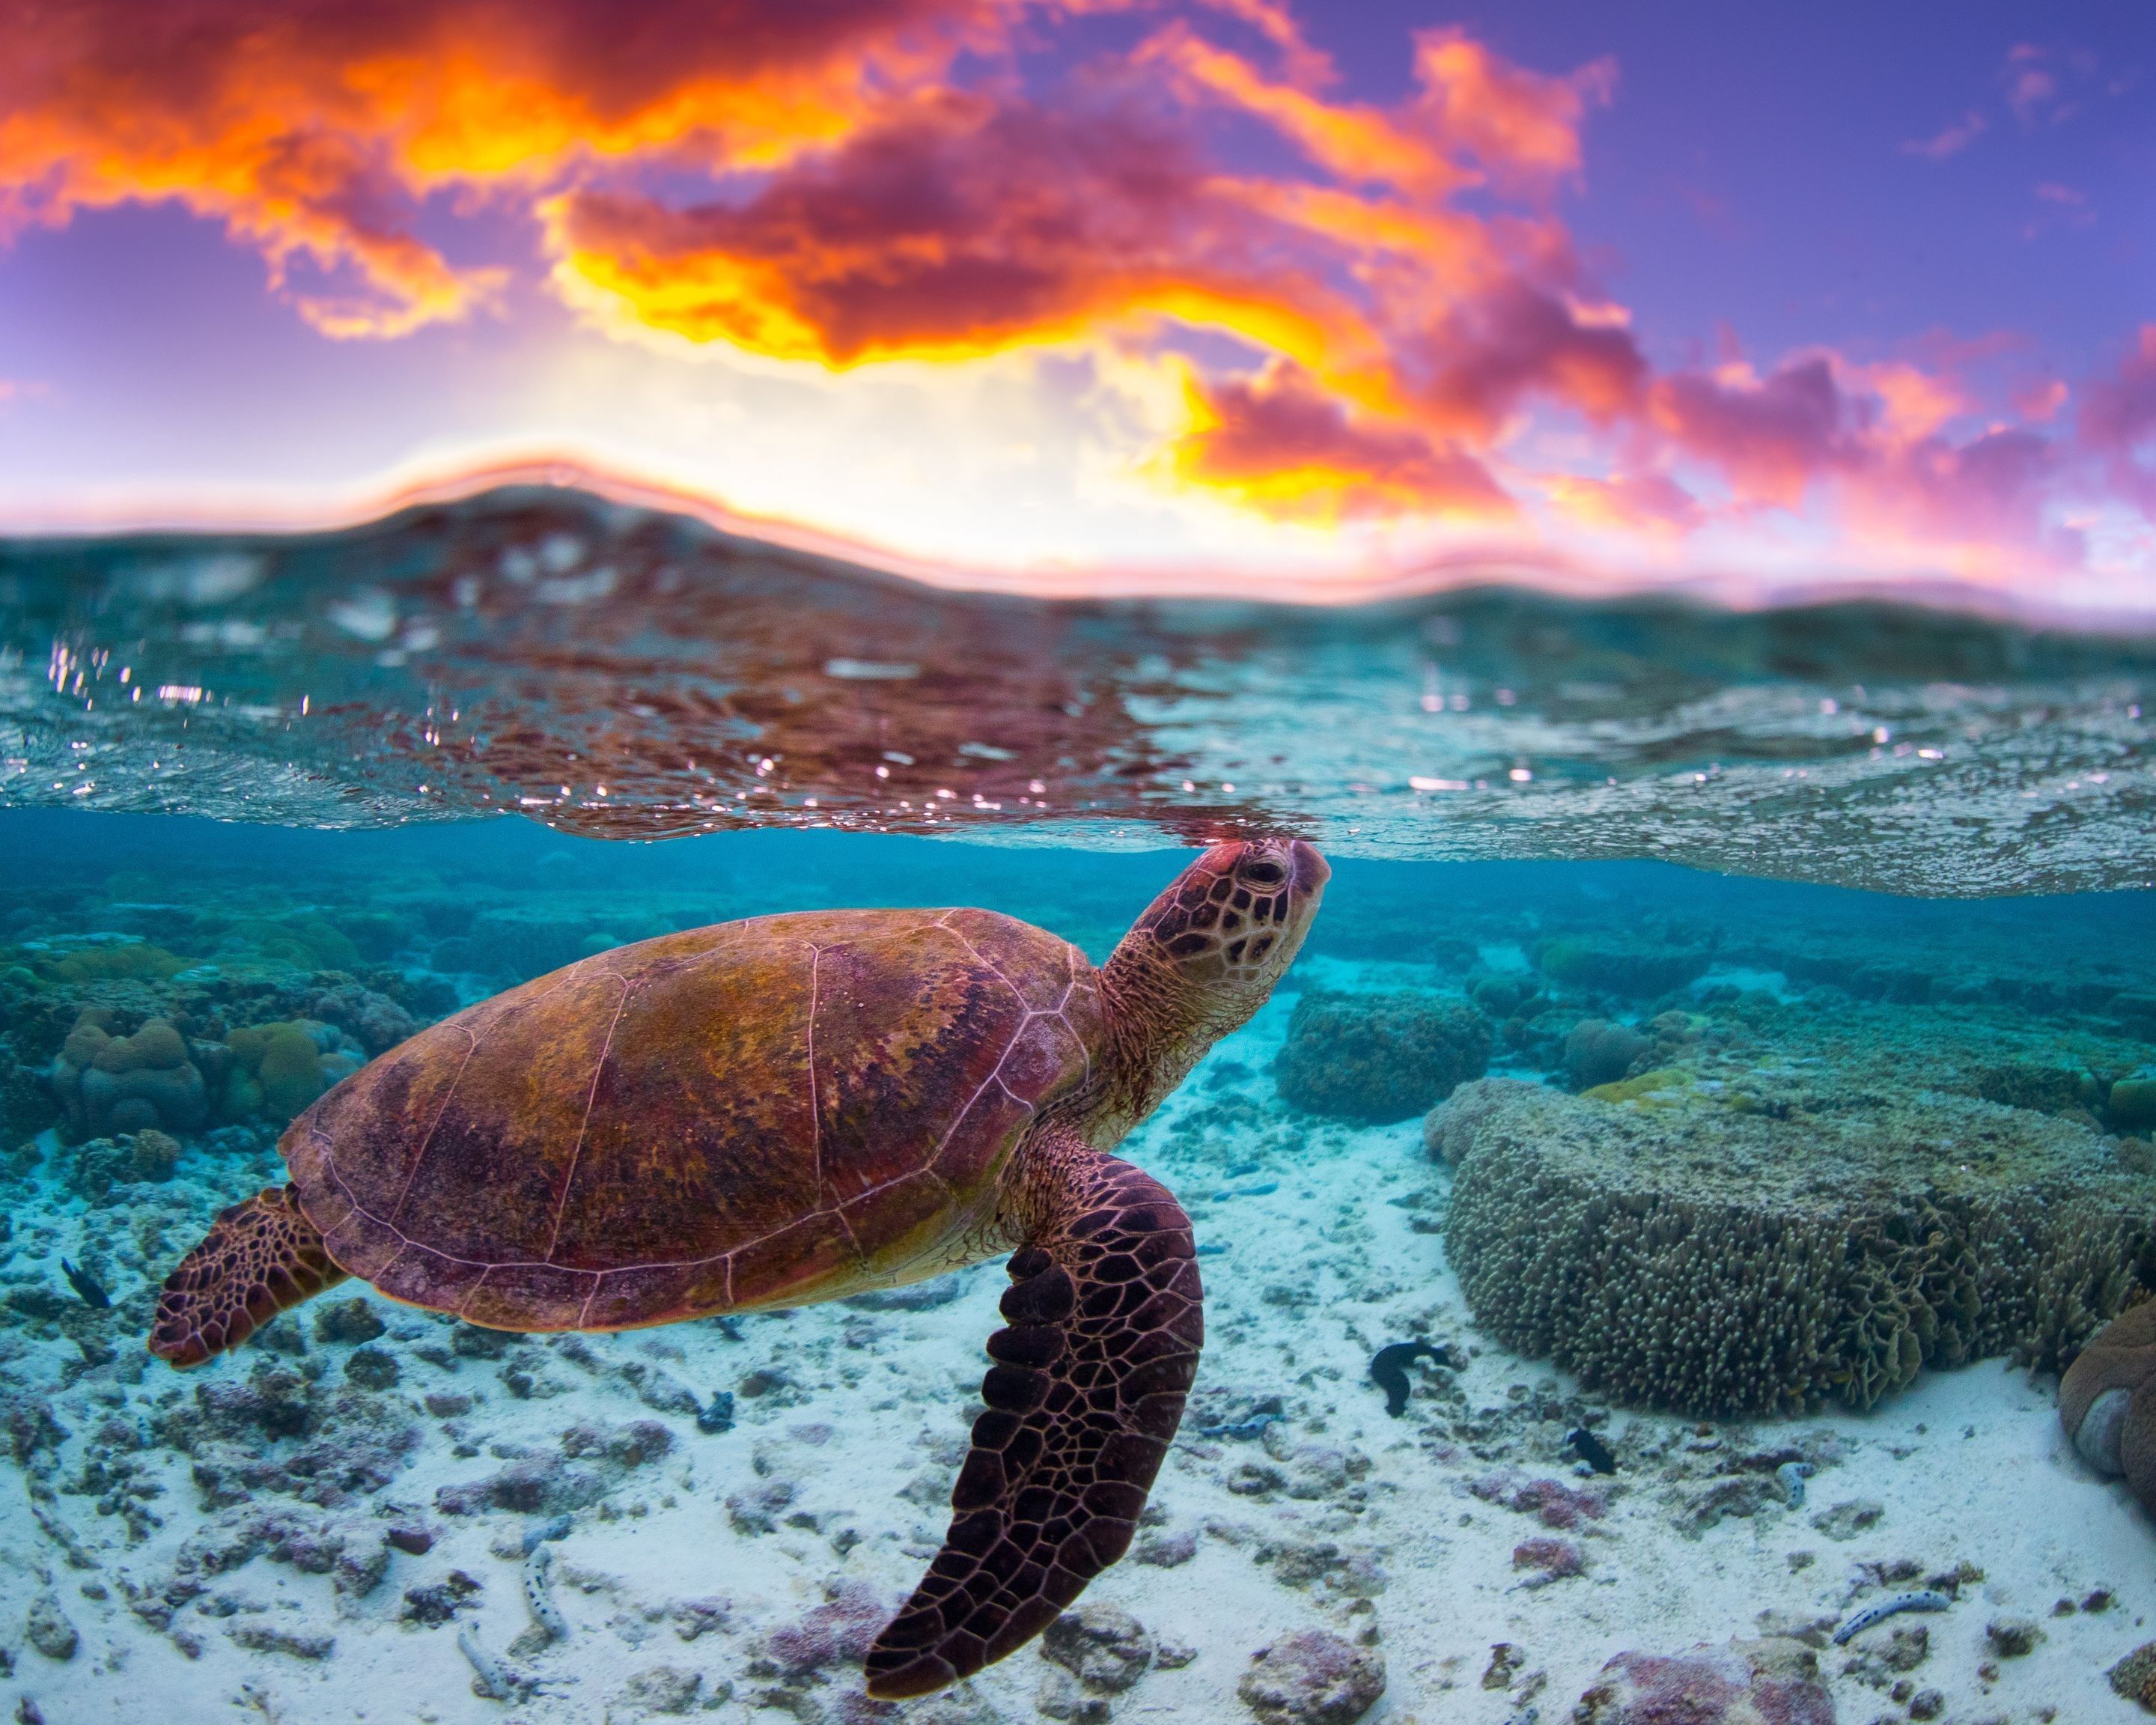 A turtle swimming in the ocean at sunset - Turtle